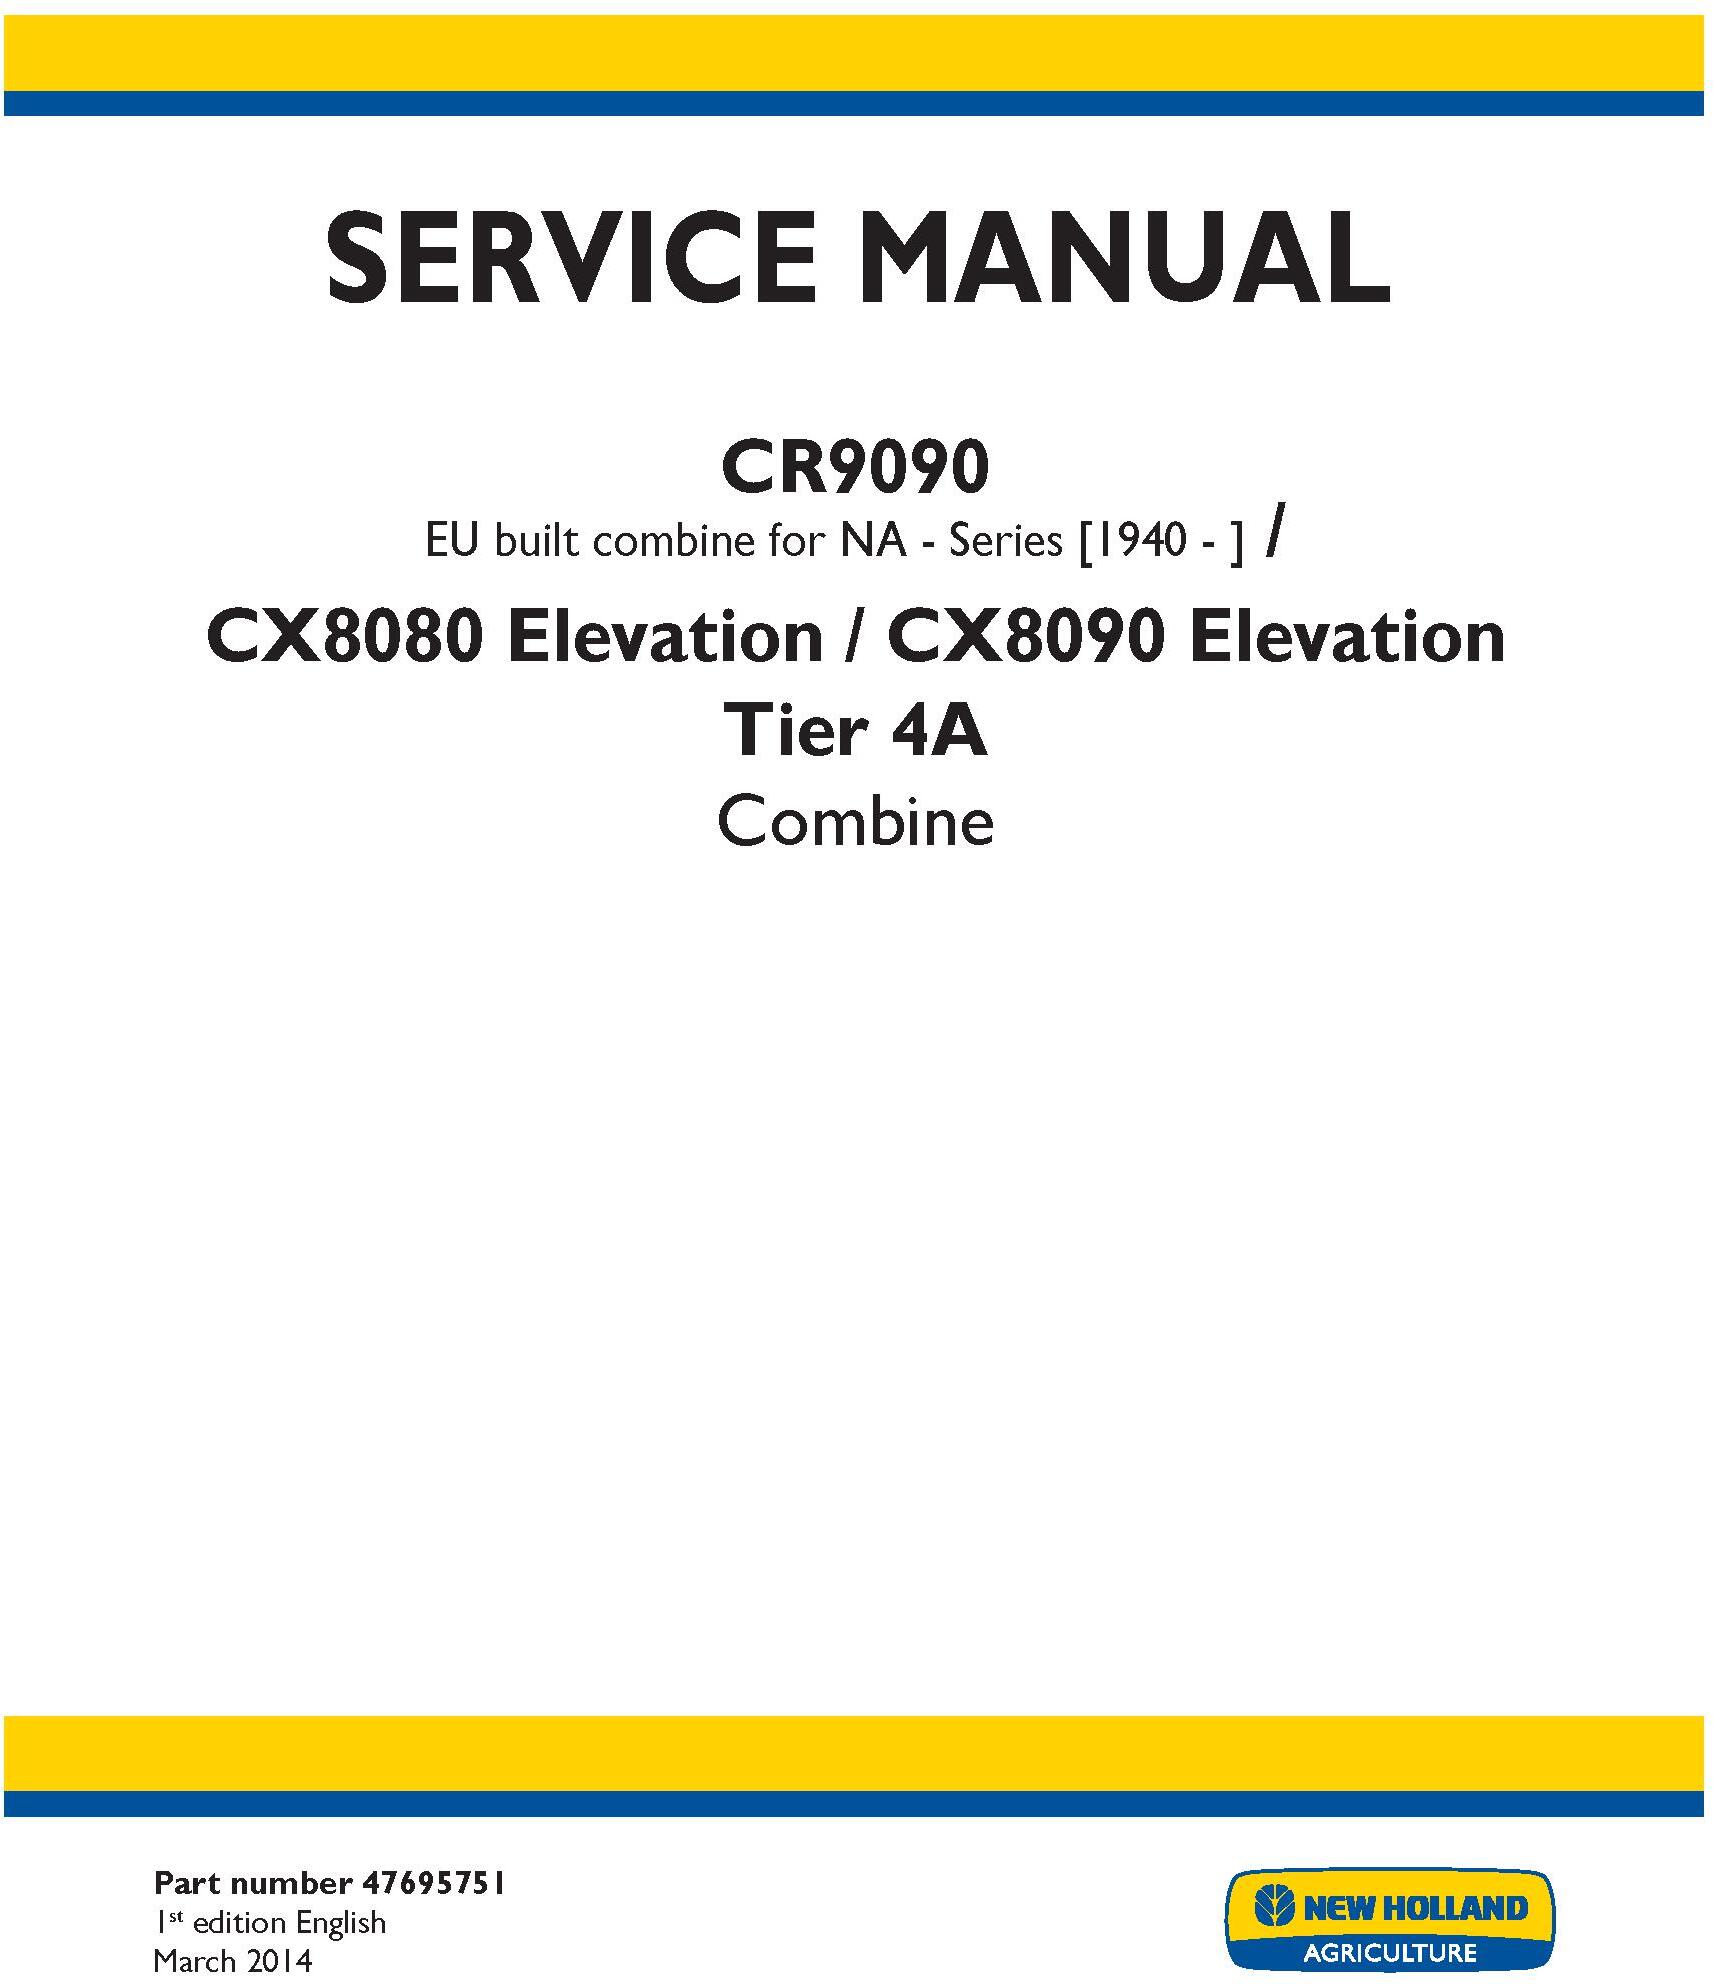 New Holland CR9090, CX8080 ELEVATION, CX8090 ELEVATION TIER 4A Combines Service Manual - 19369